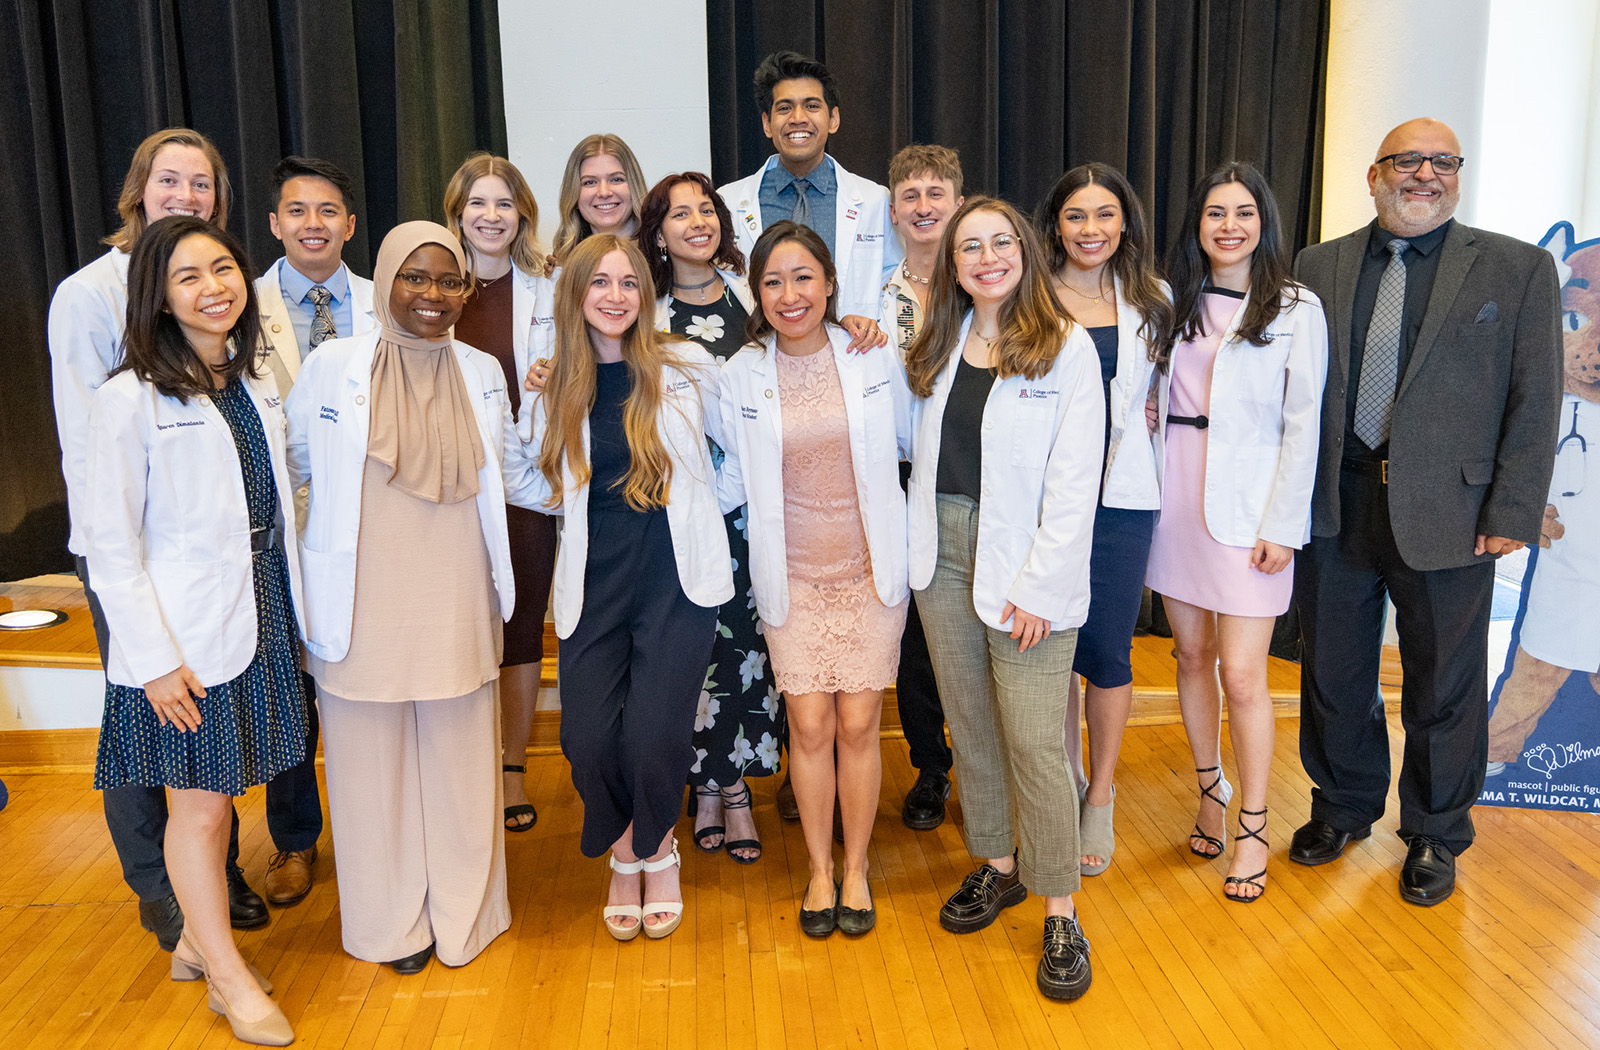 The Class of 2025 medical student inductees into the Gold Humanism Honor Society